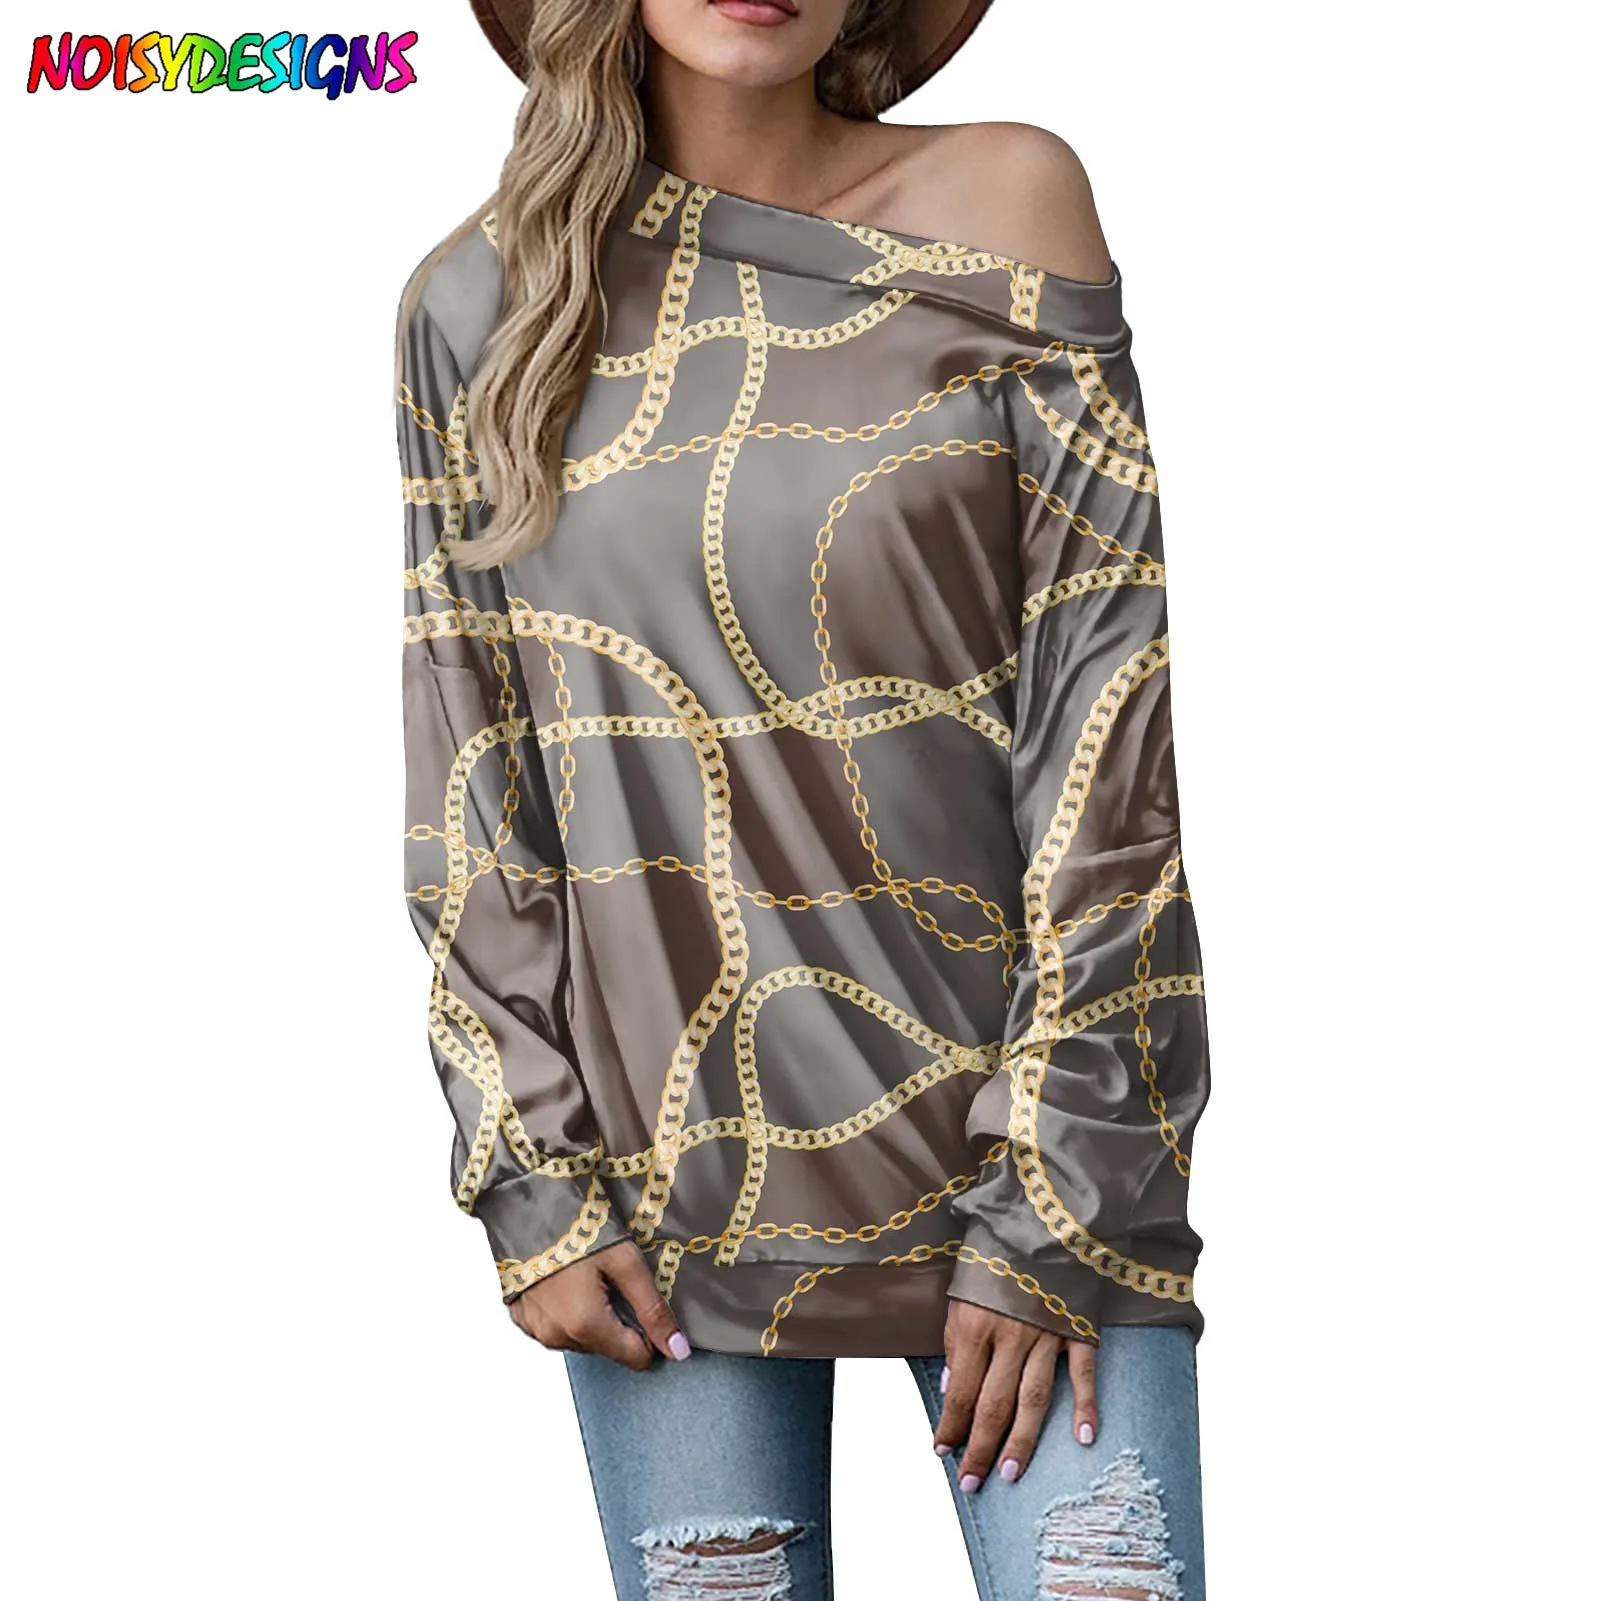 NOISYDESIGNS 2021 shirt with women autumn korean vintage europe golden chain printing loose O-neck long-sleeved t-shirt top